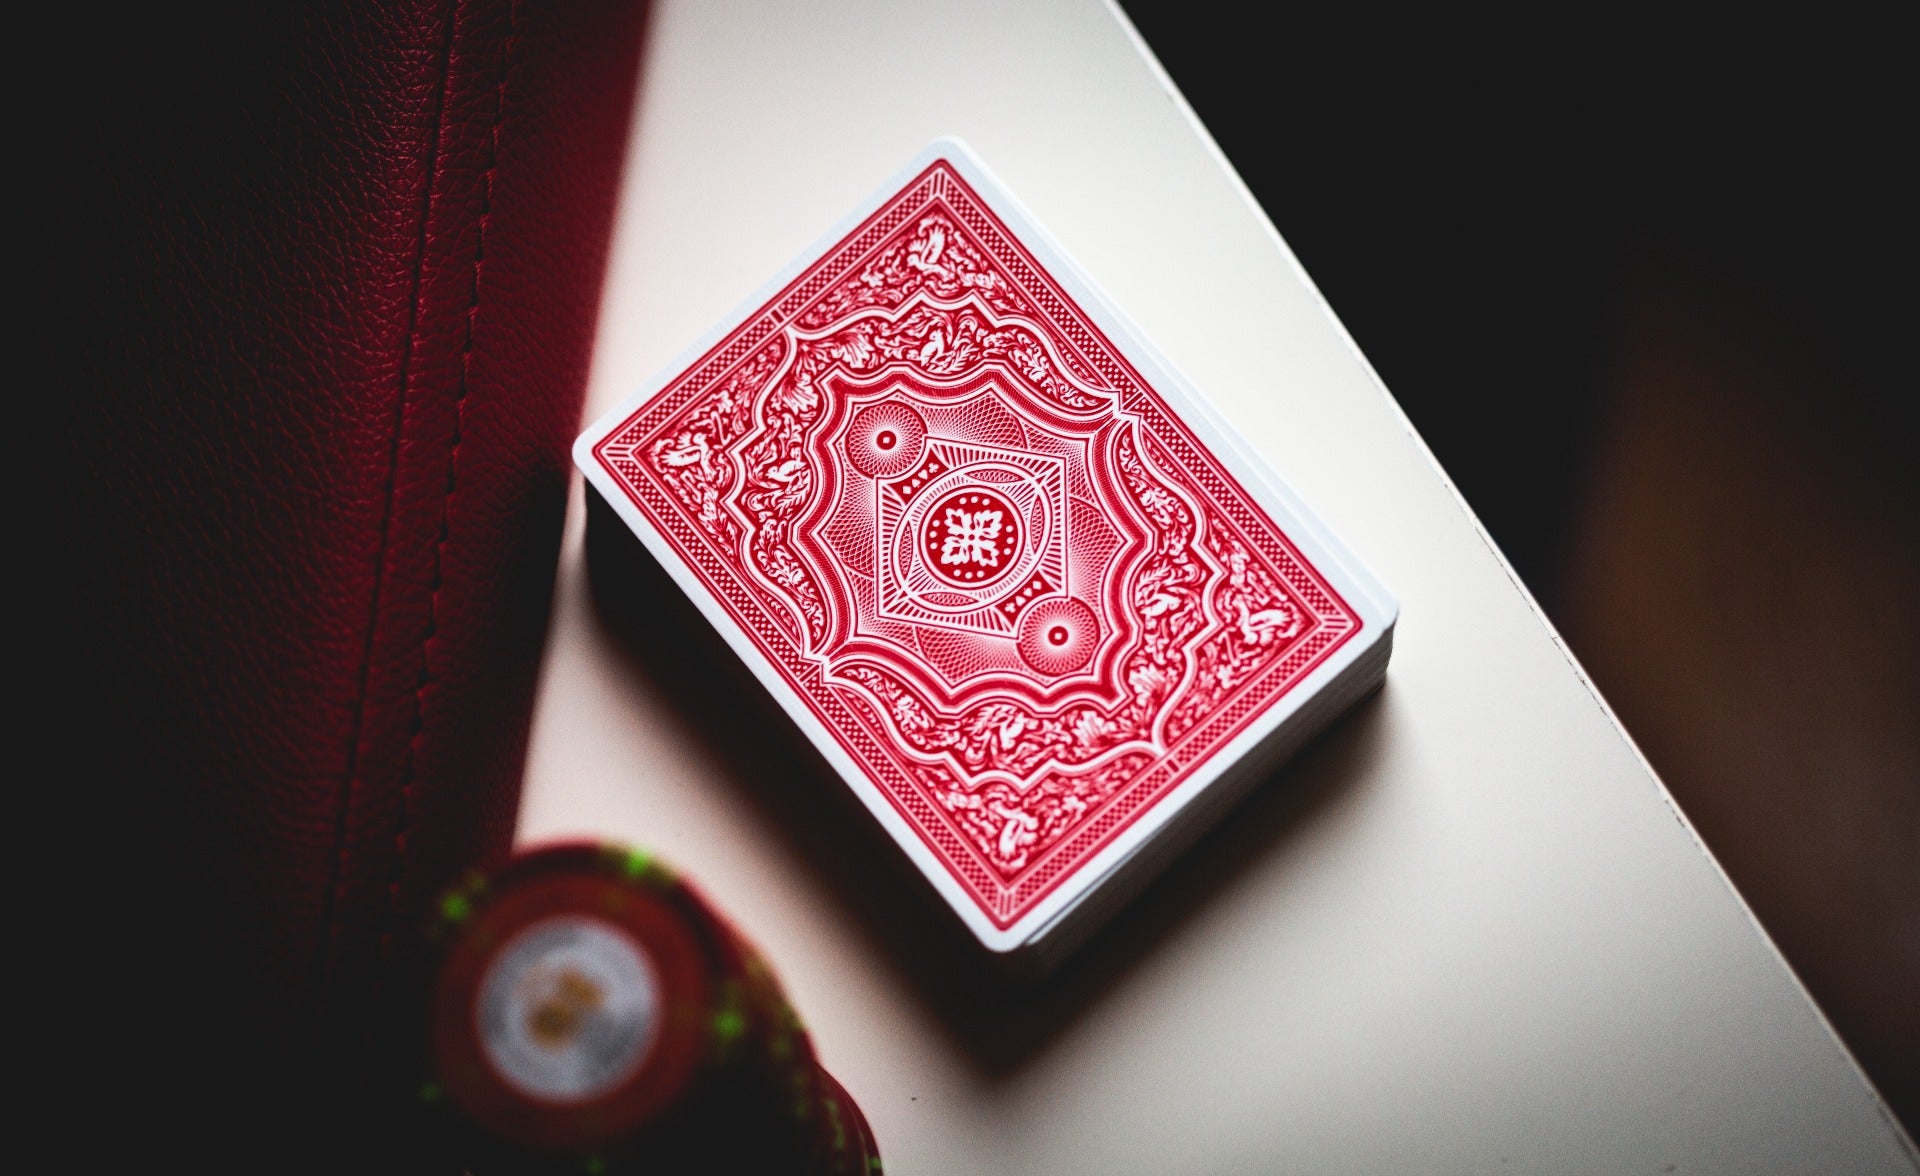 Cohorts Playing Cards